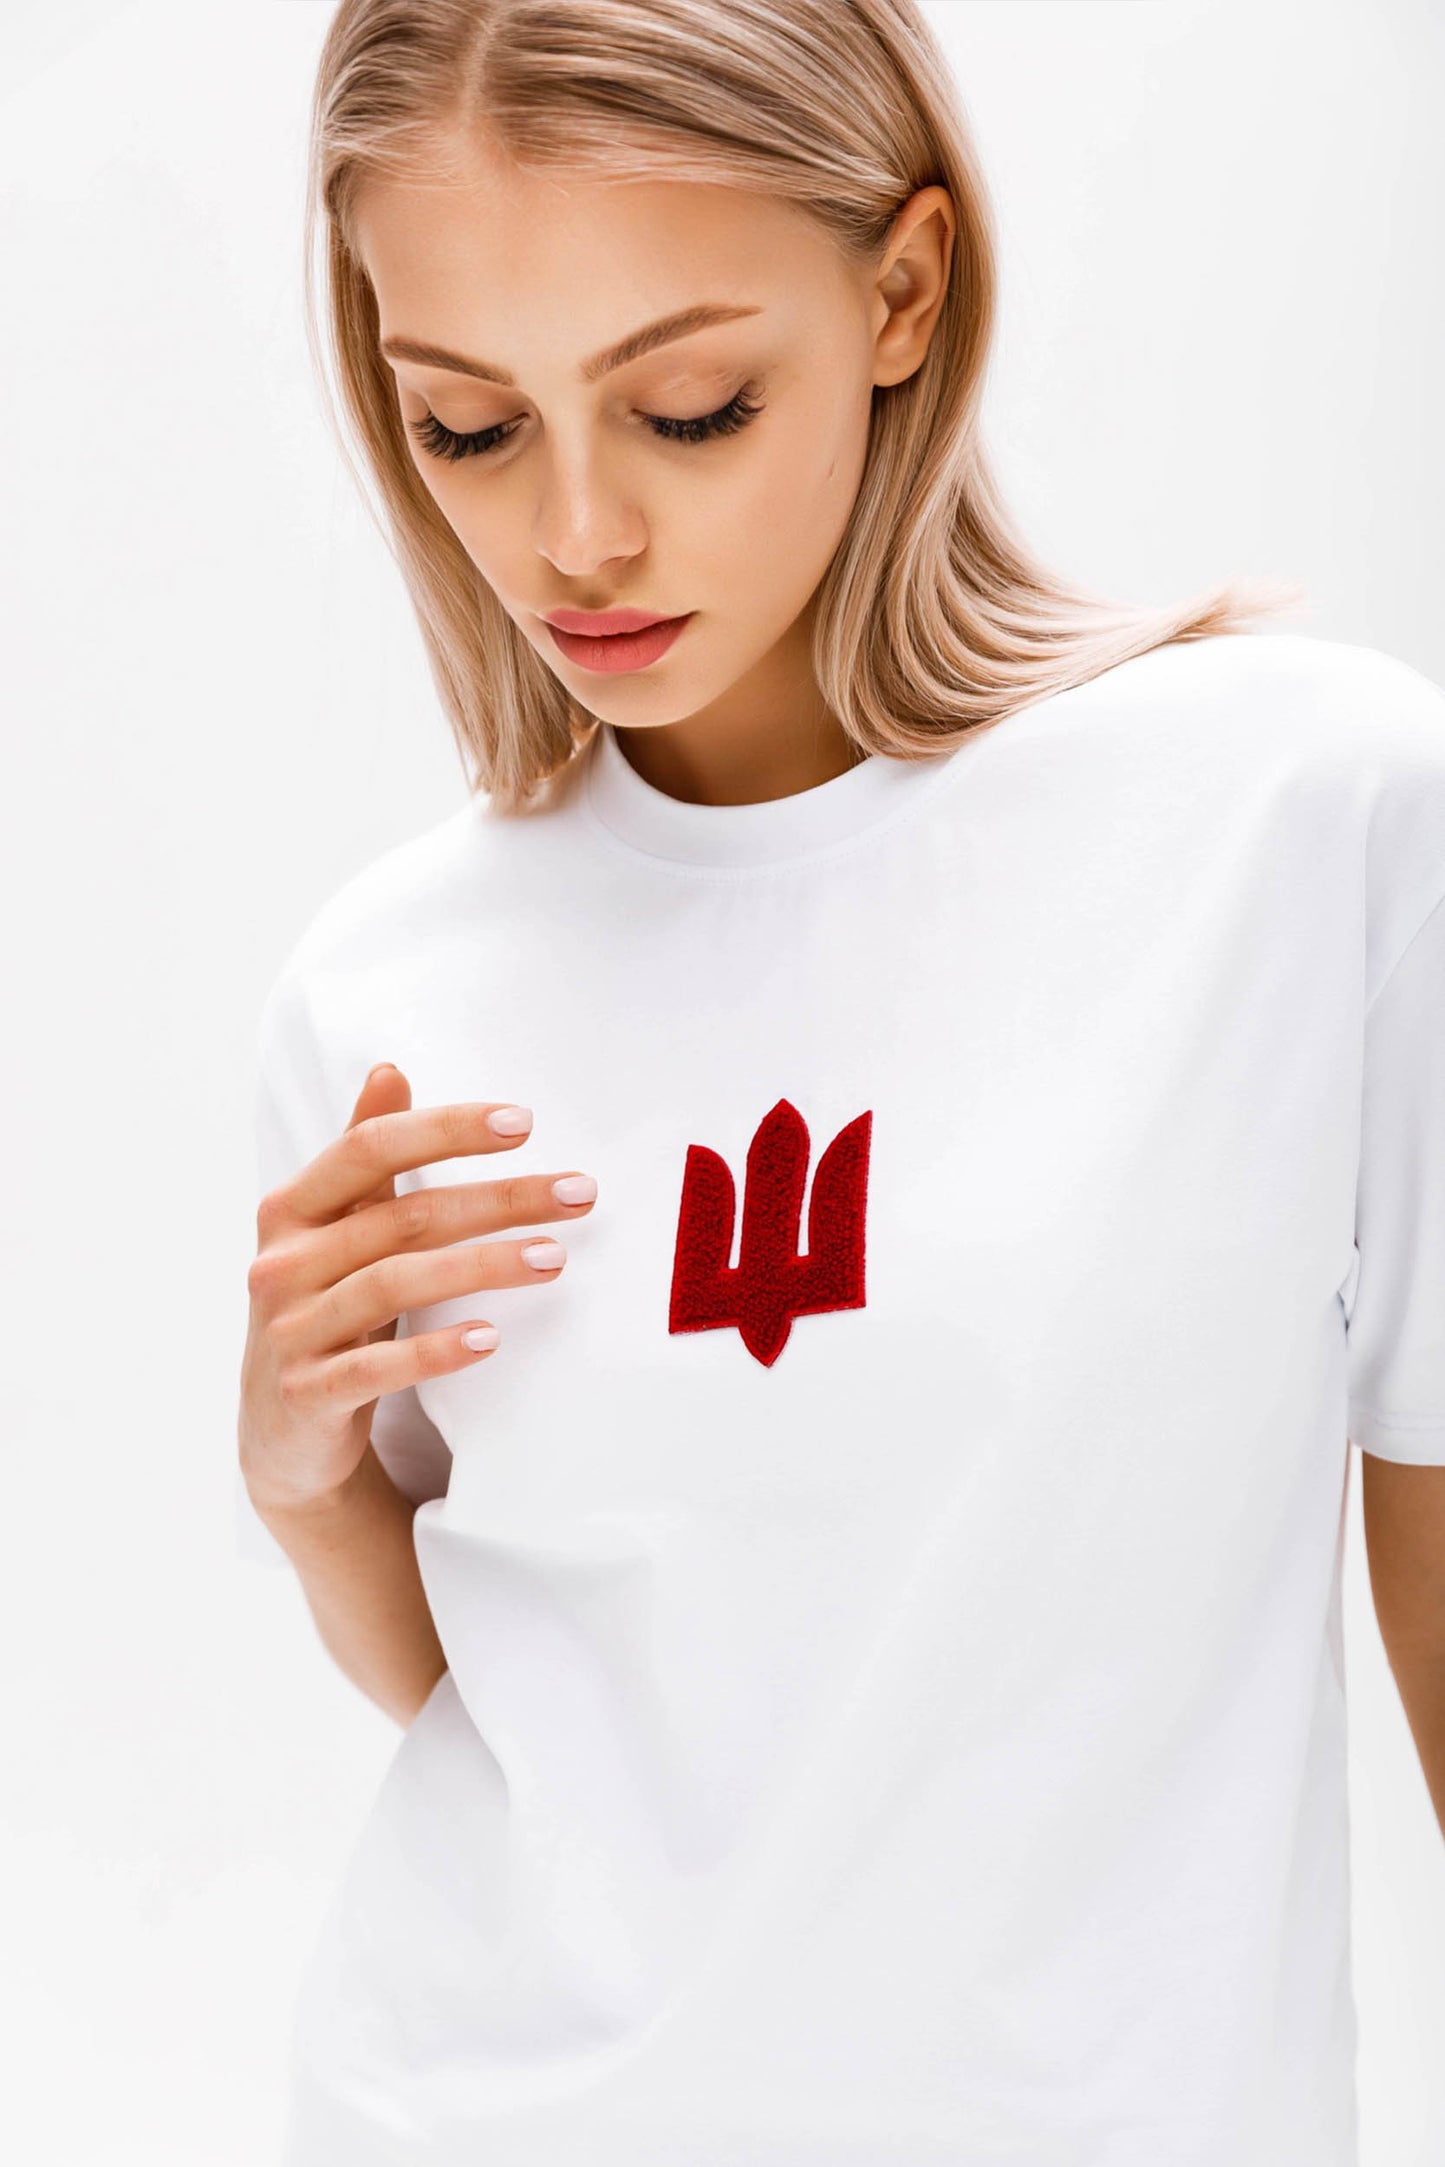 Weißes rotes Tryzub-T-Shirt